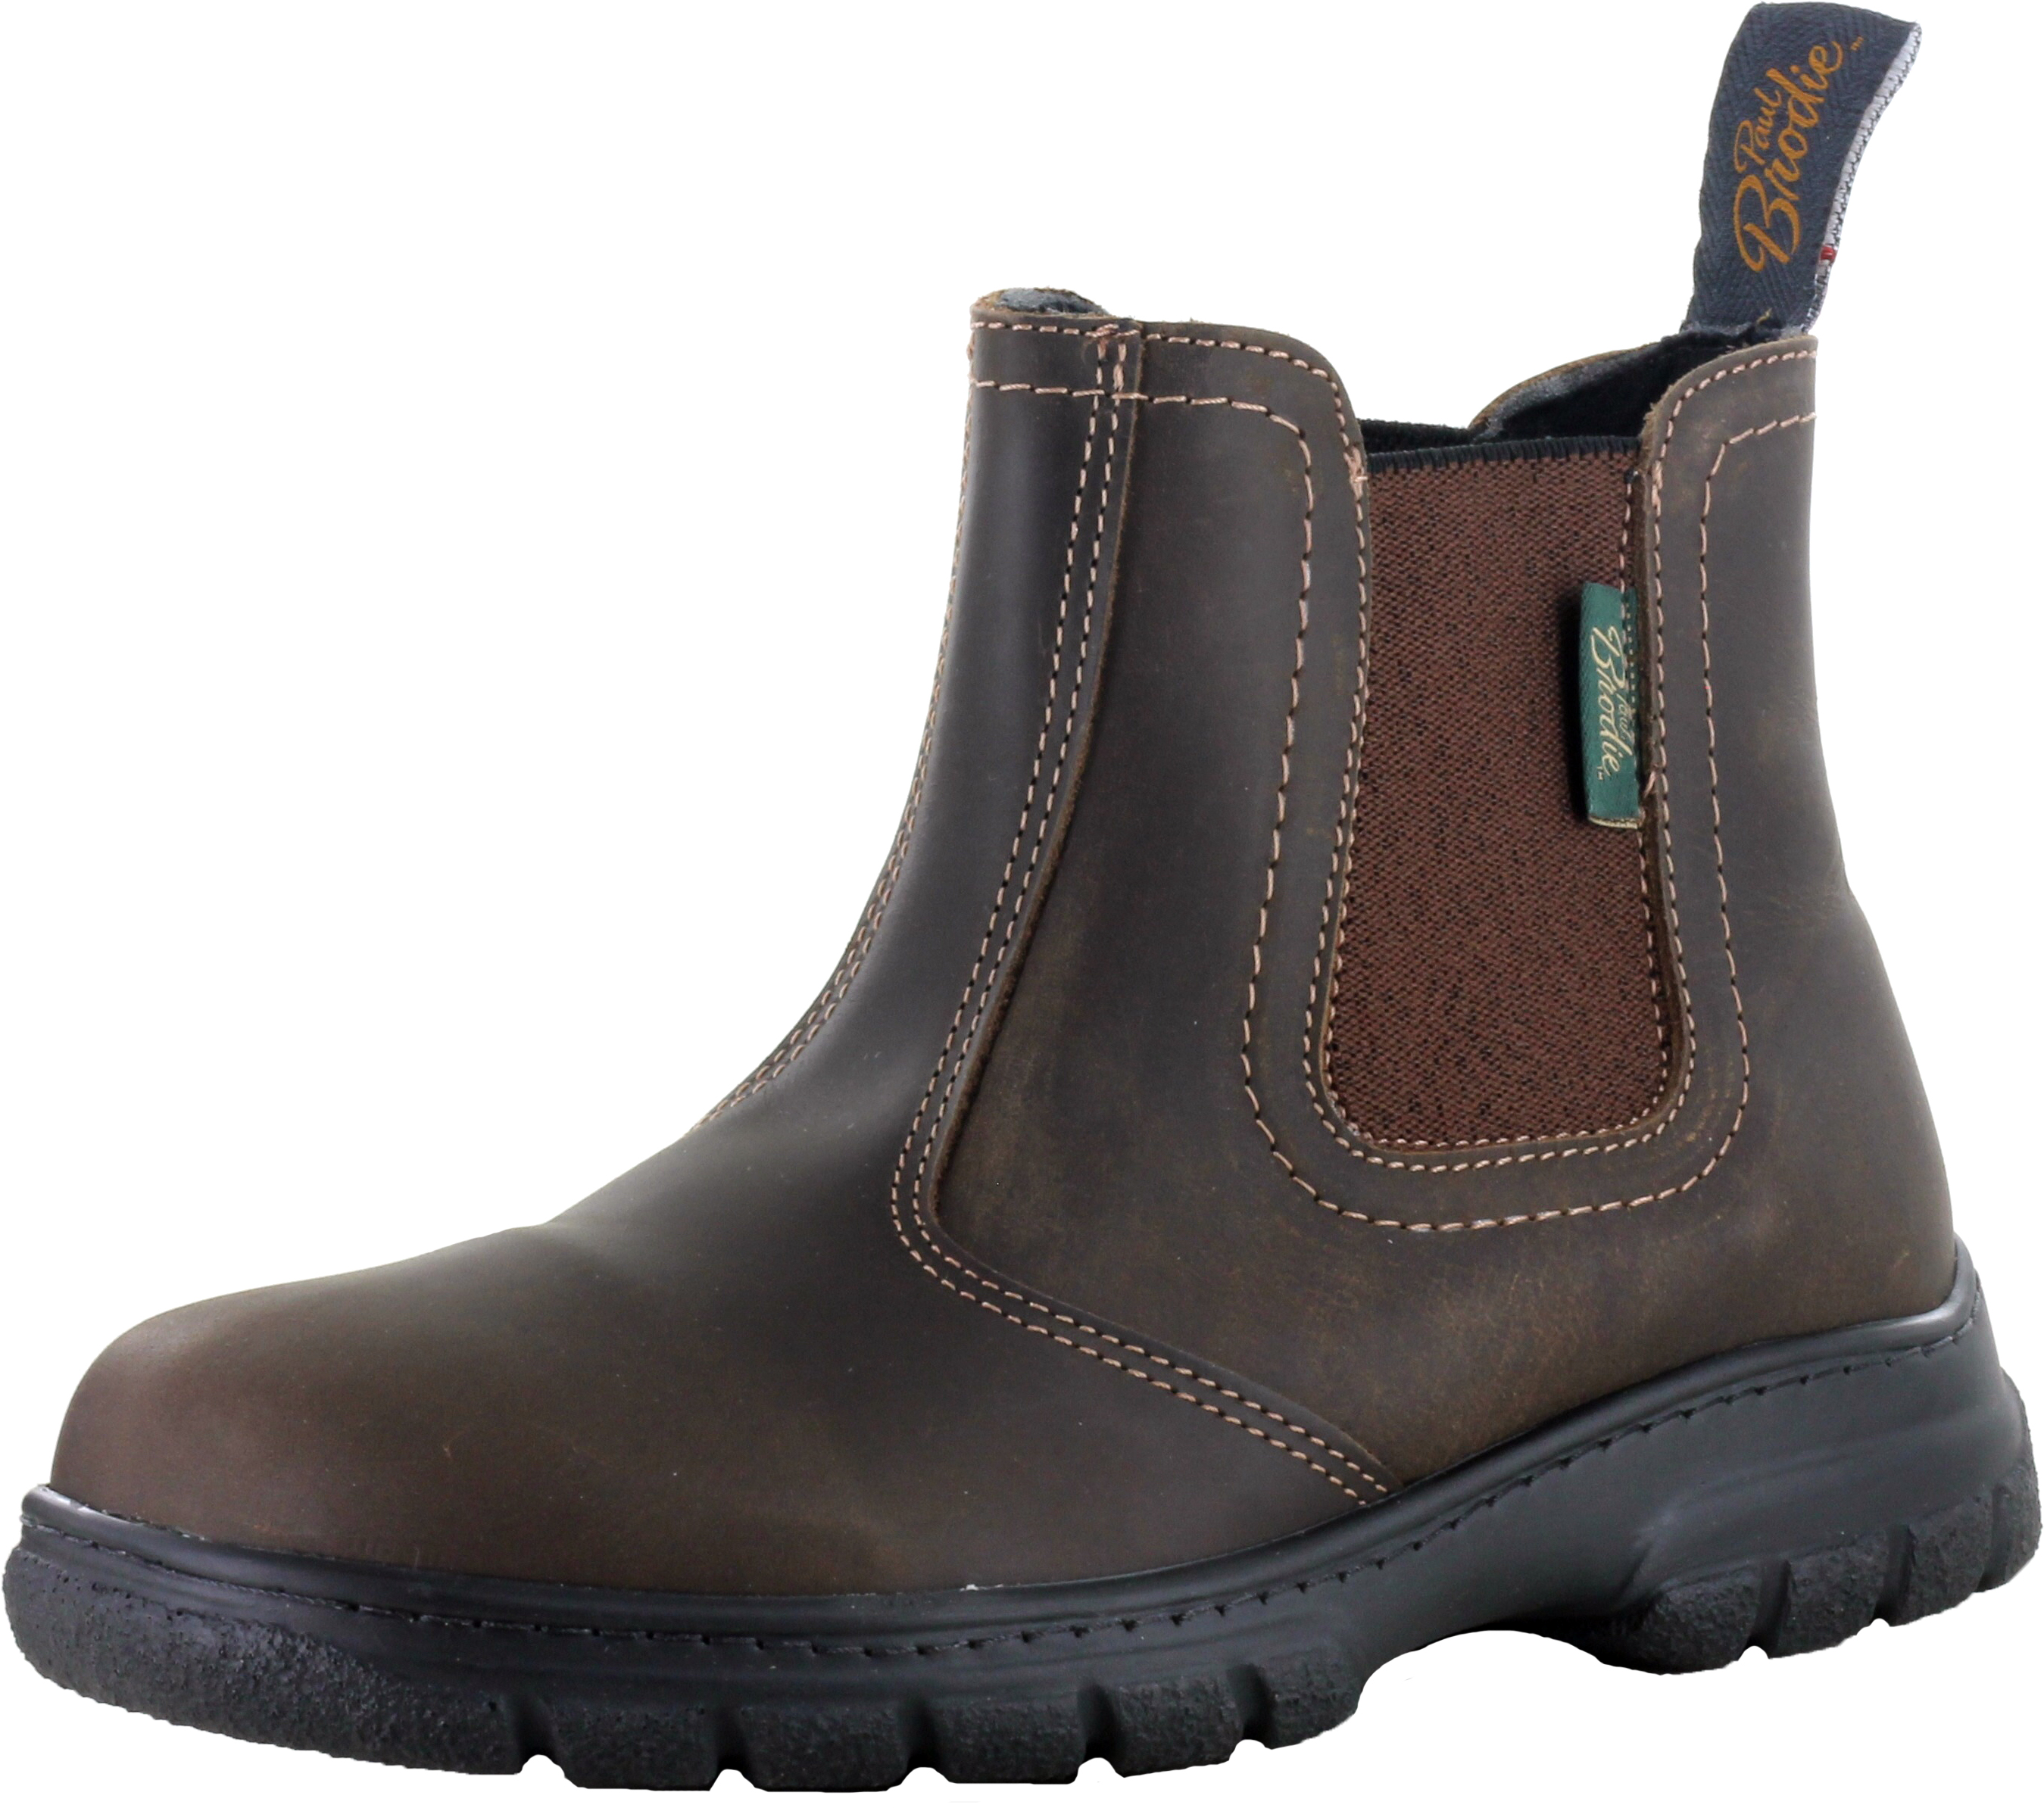 Ladies Paul Brodie Double Gore Boots - Crazy Horse Brown